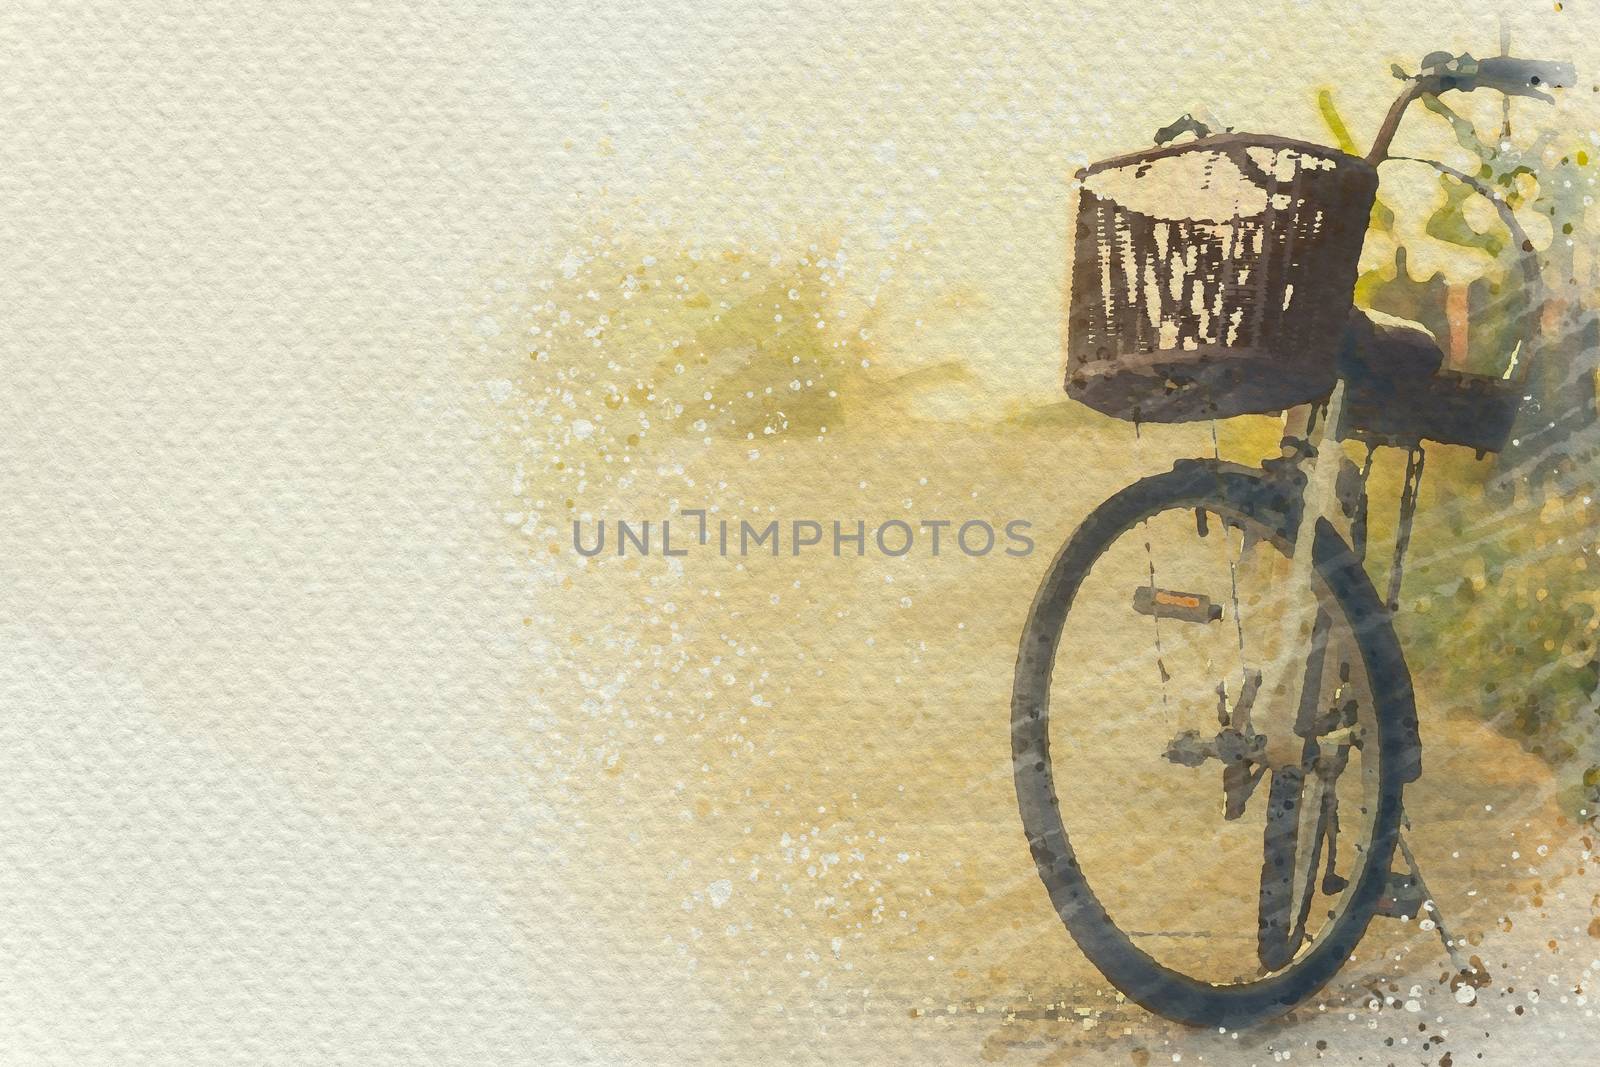 Bicycle parked on the wayside. Digital watercolor painting effec by SaitanSainam